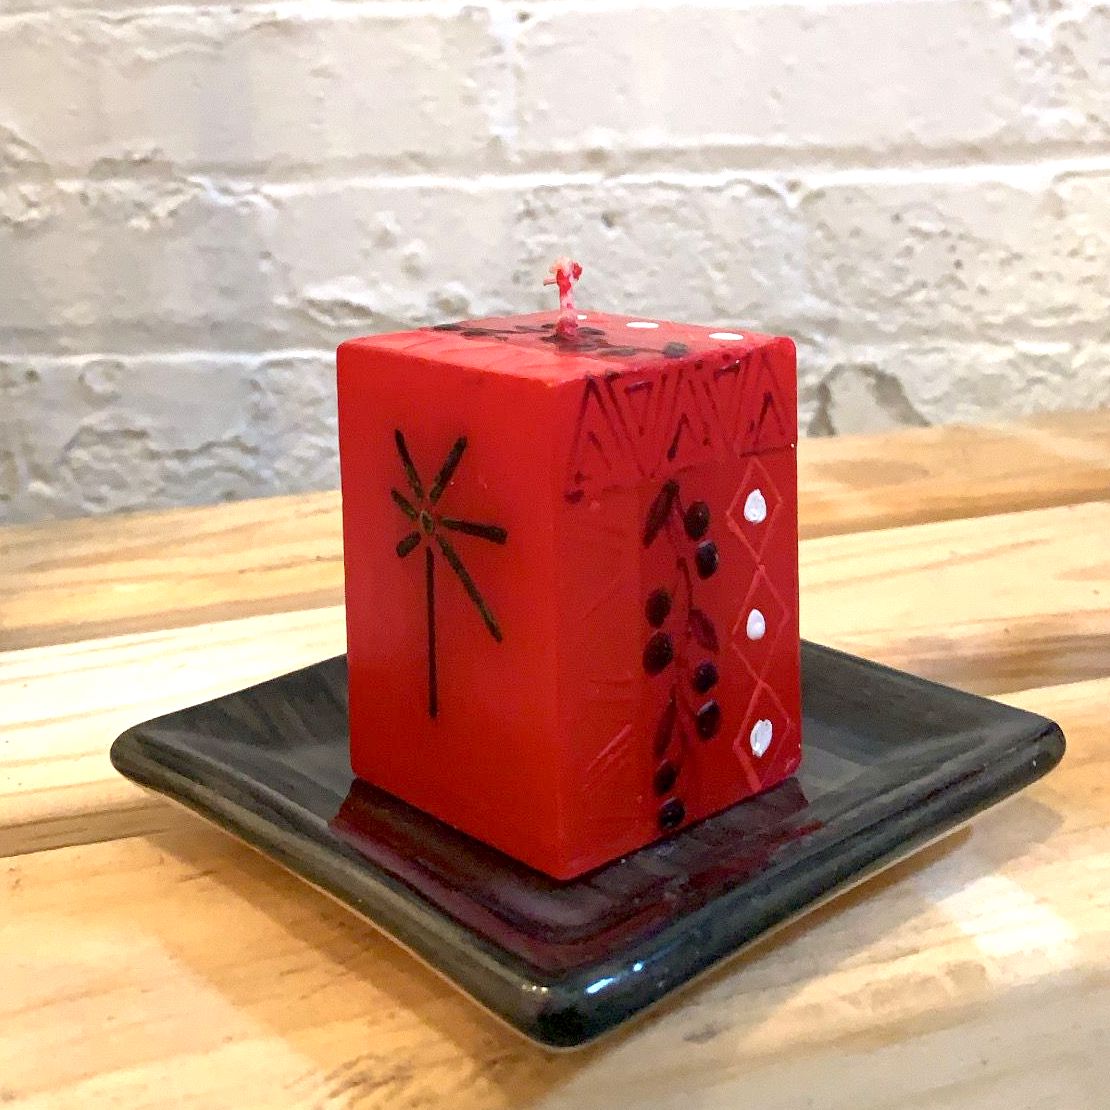 Kwanzaa red 2x2x3 cube candle showing symbol on the front and flower pattern on the side. Sitting on a black candle coaster.